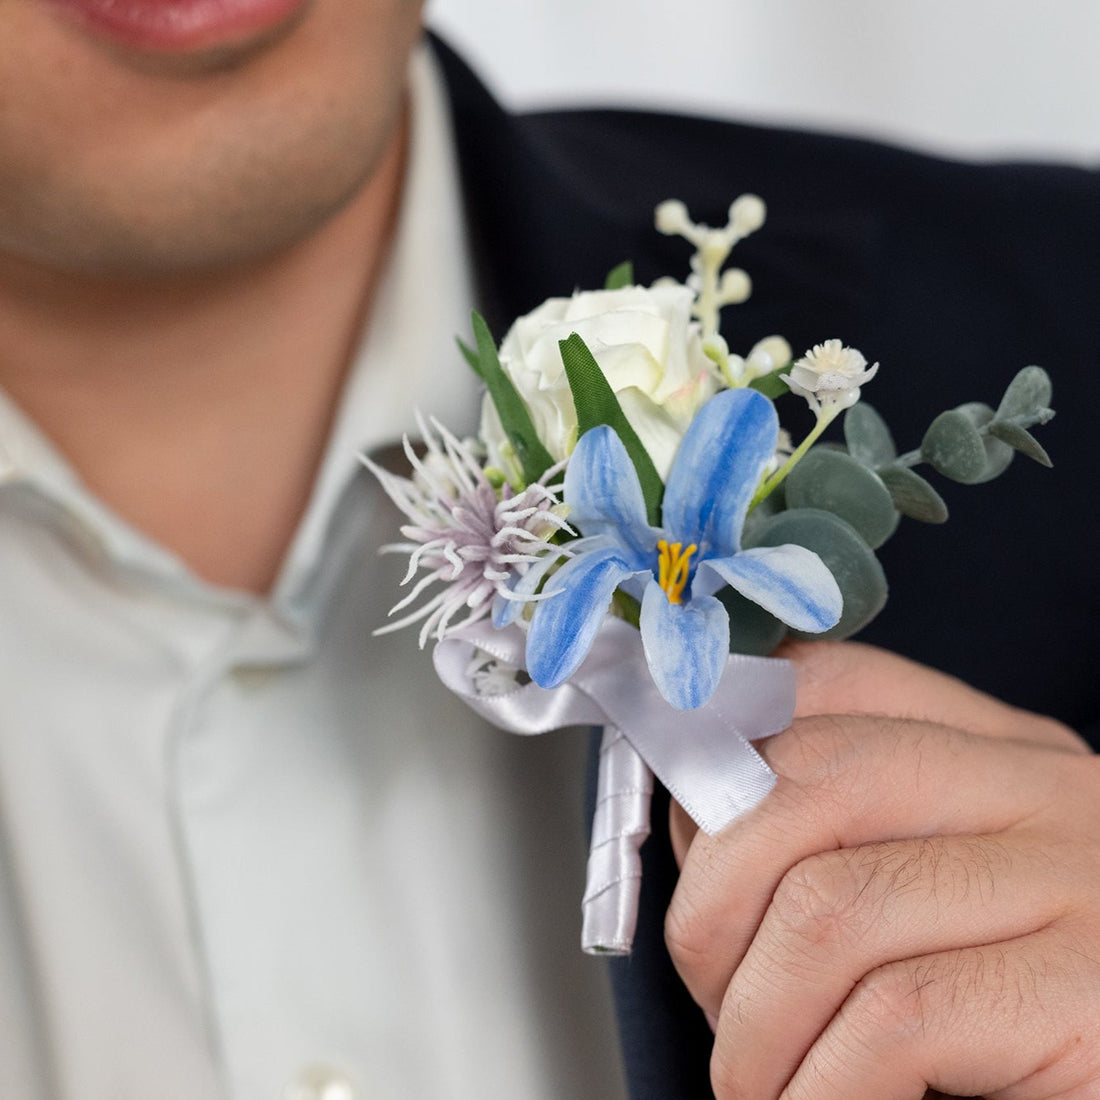 Calm waters boutonniere